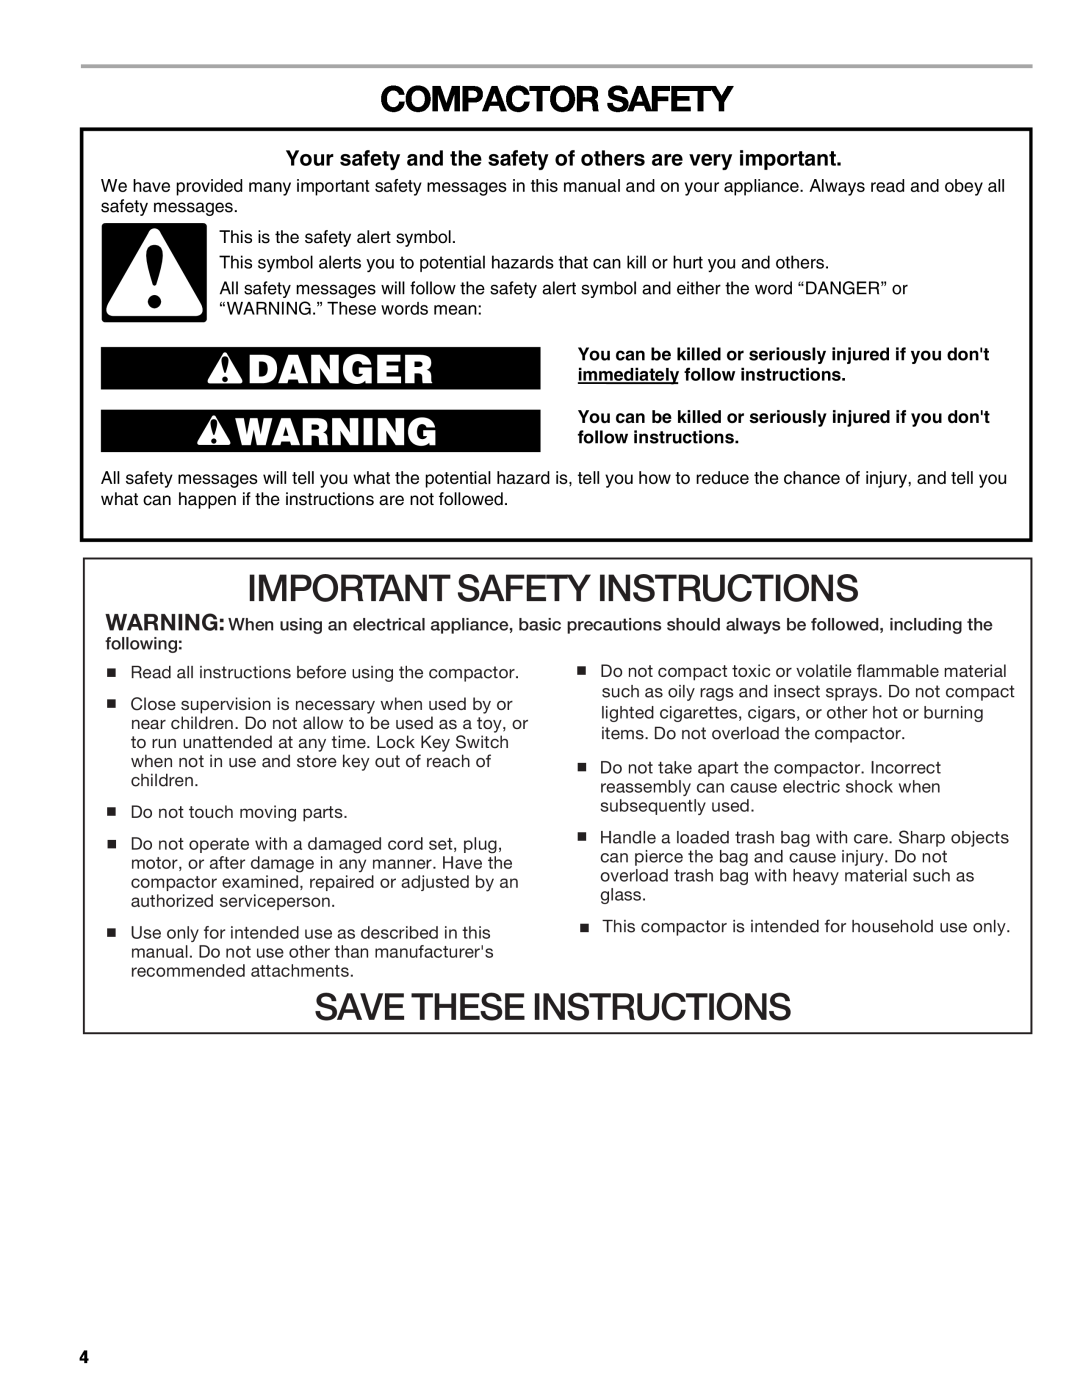 Kenmore 665.1363 manual Compactor Safety, Important Safety Instructions, Save These Instructions 